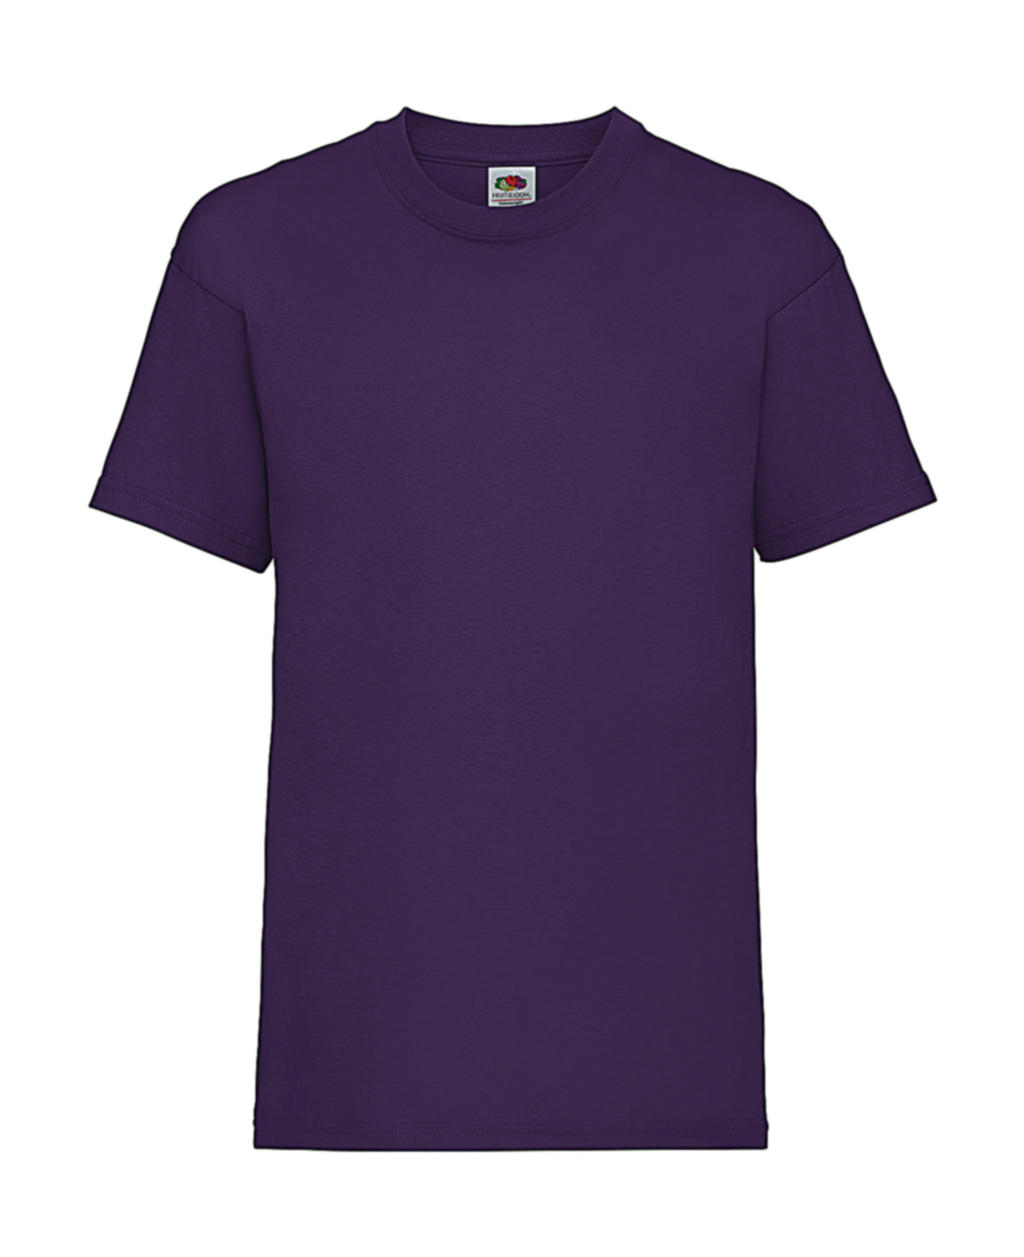  Kids Valueweight T in Farbe Purple